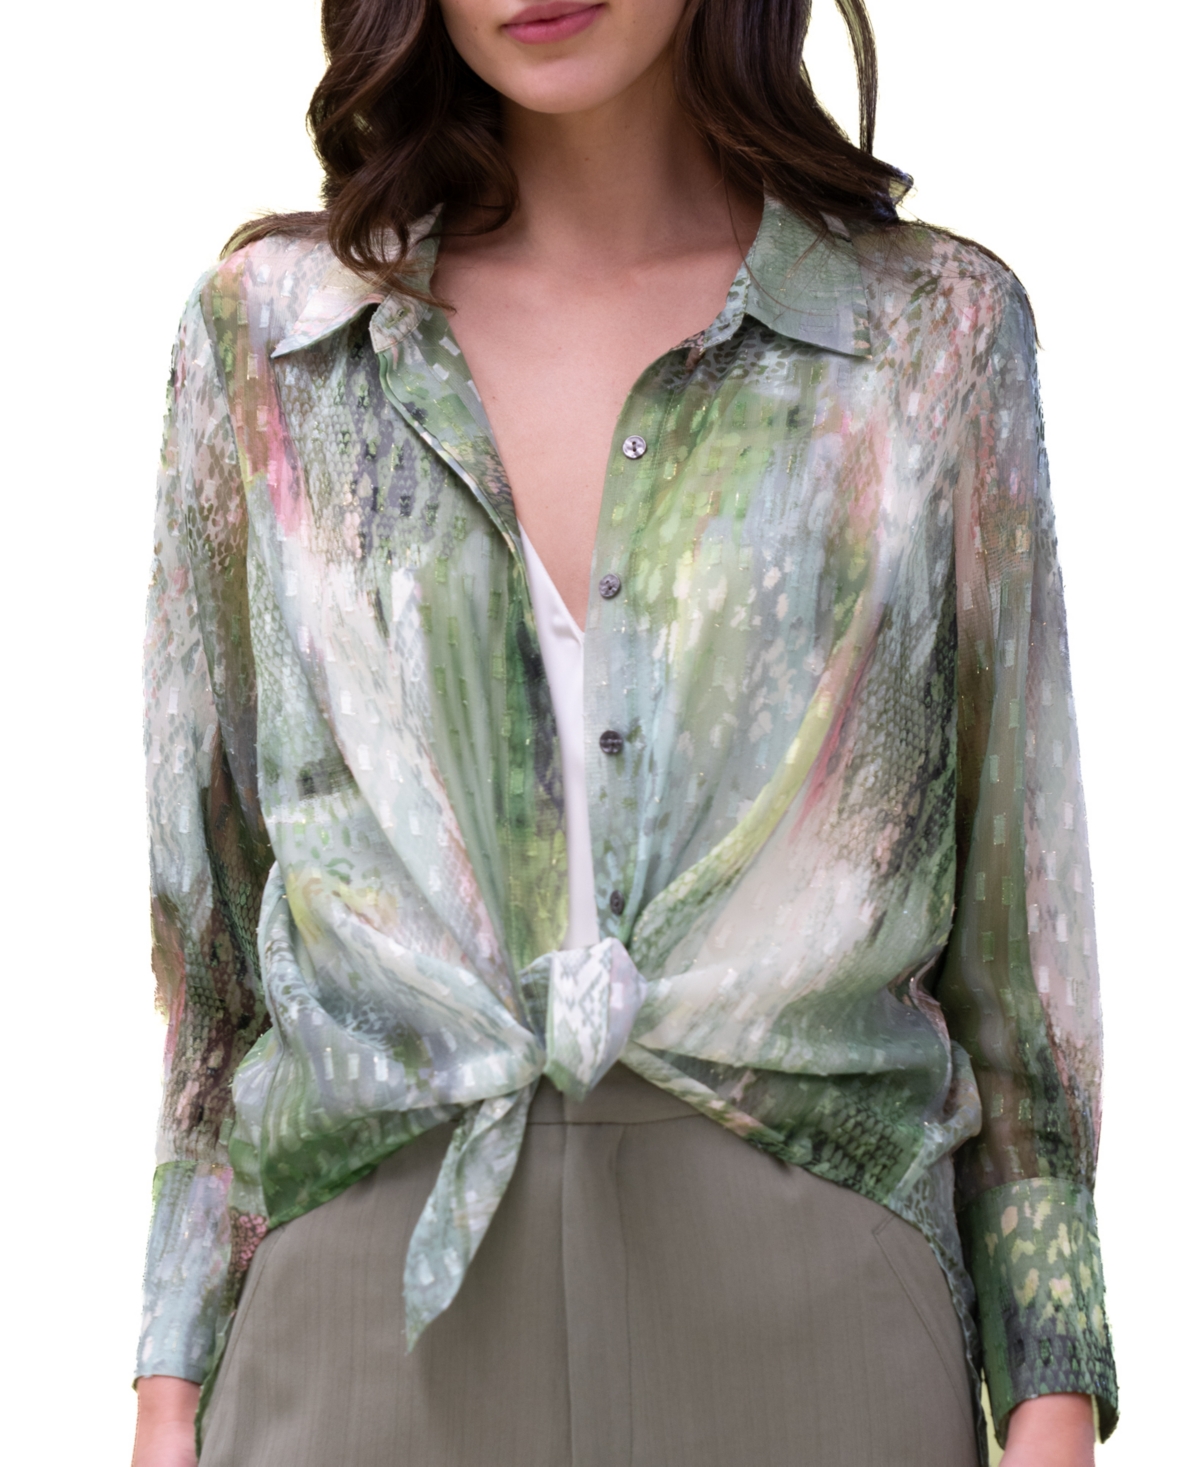 Women's Button-Front High-Low Woven Top - Green Print